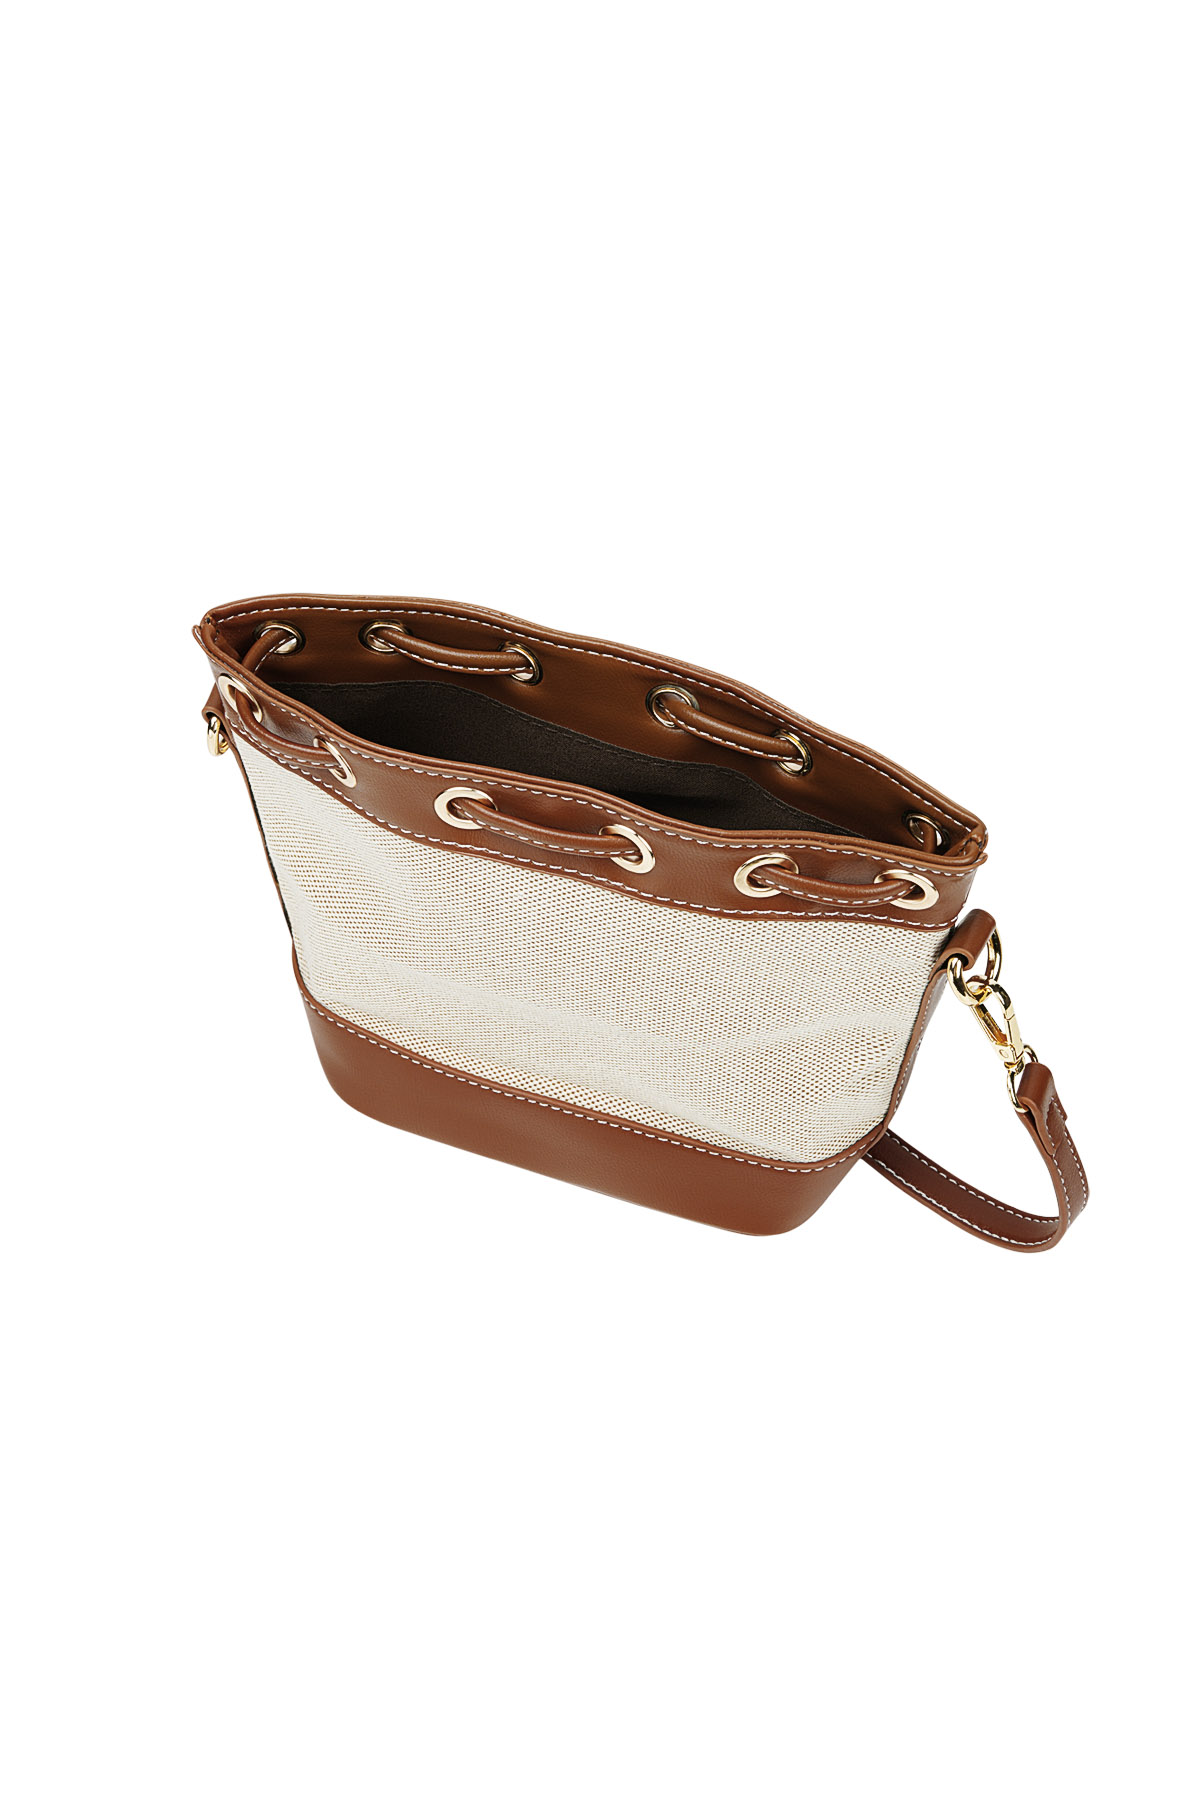 Bucket bag old money style - brown/beige h5 Picture7